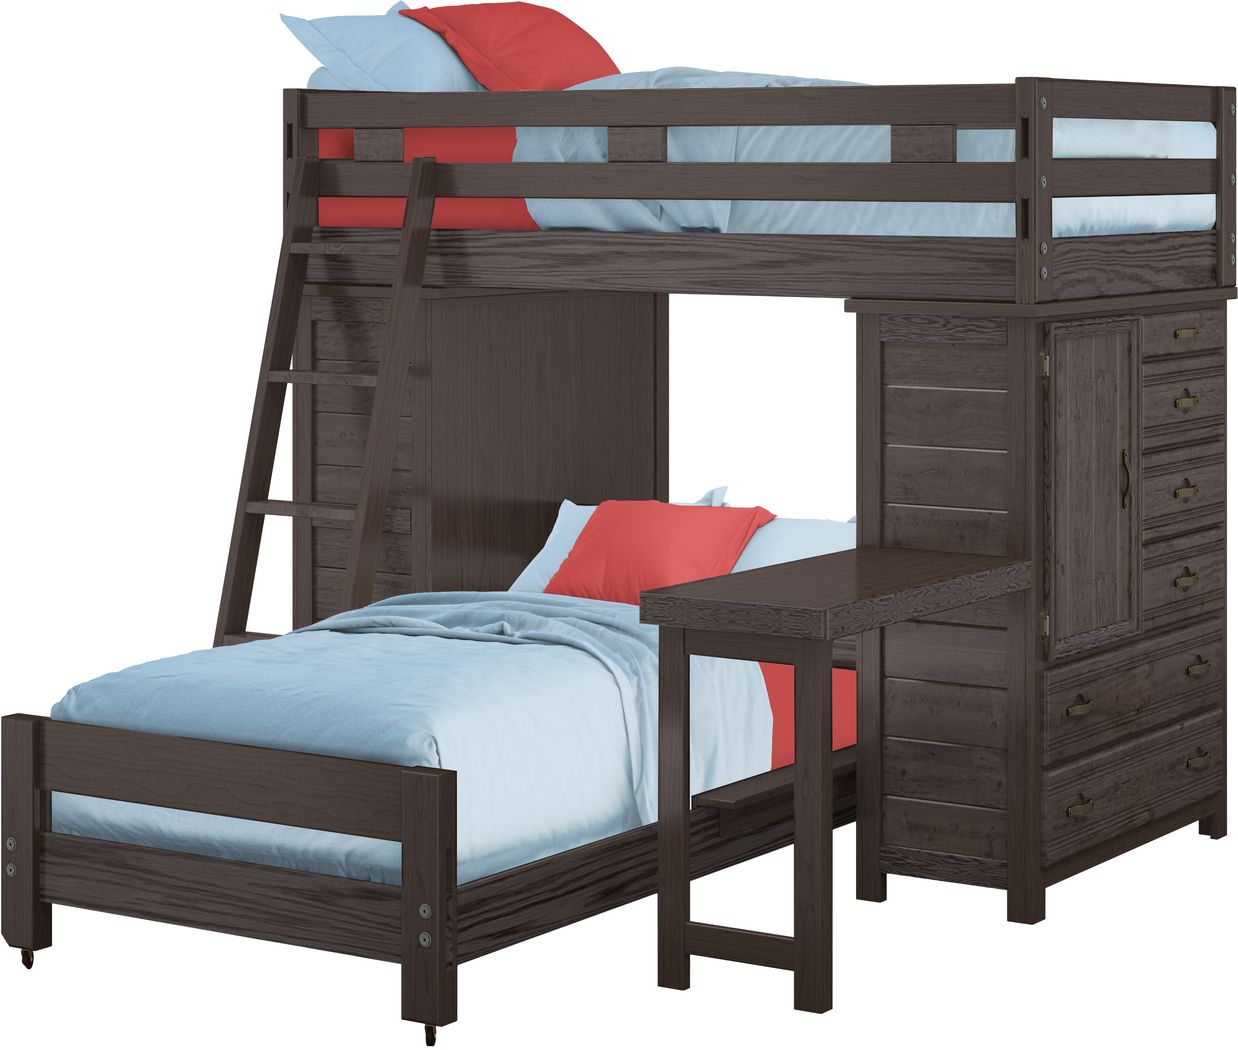 Creekside Furniture Collection Bunk, Canyon Creekside Bunk Bed